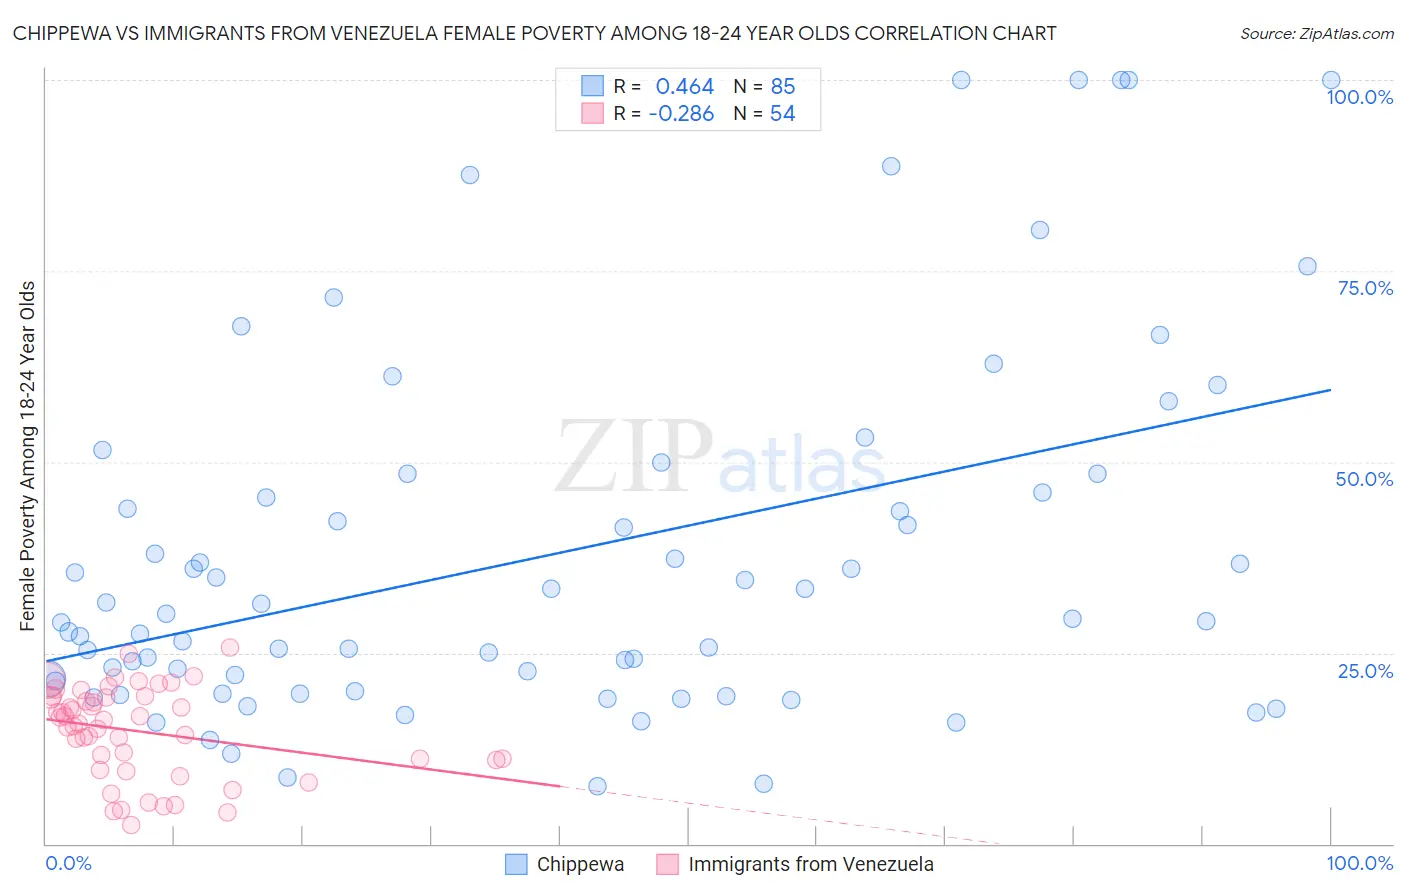 Chippewa vs Immigrants from Venezuela Female Poverty Among 18-24 Year Olds